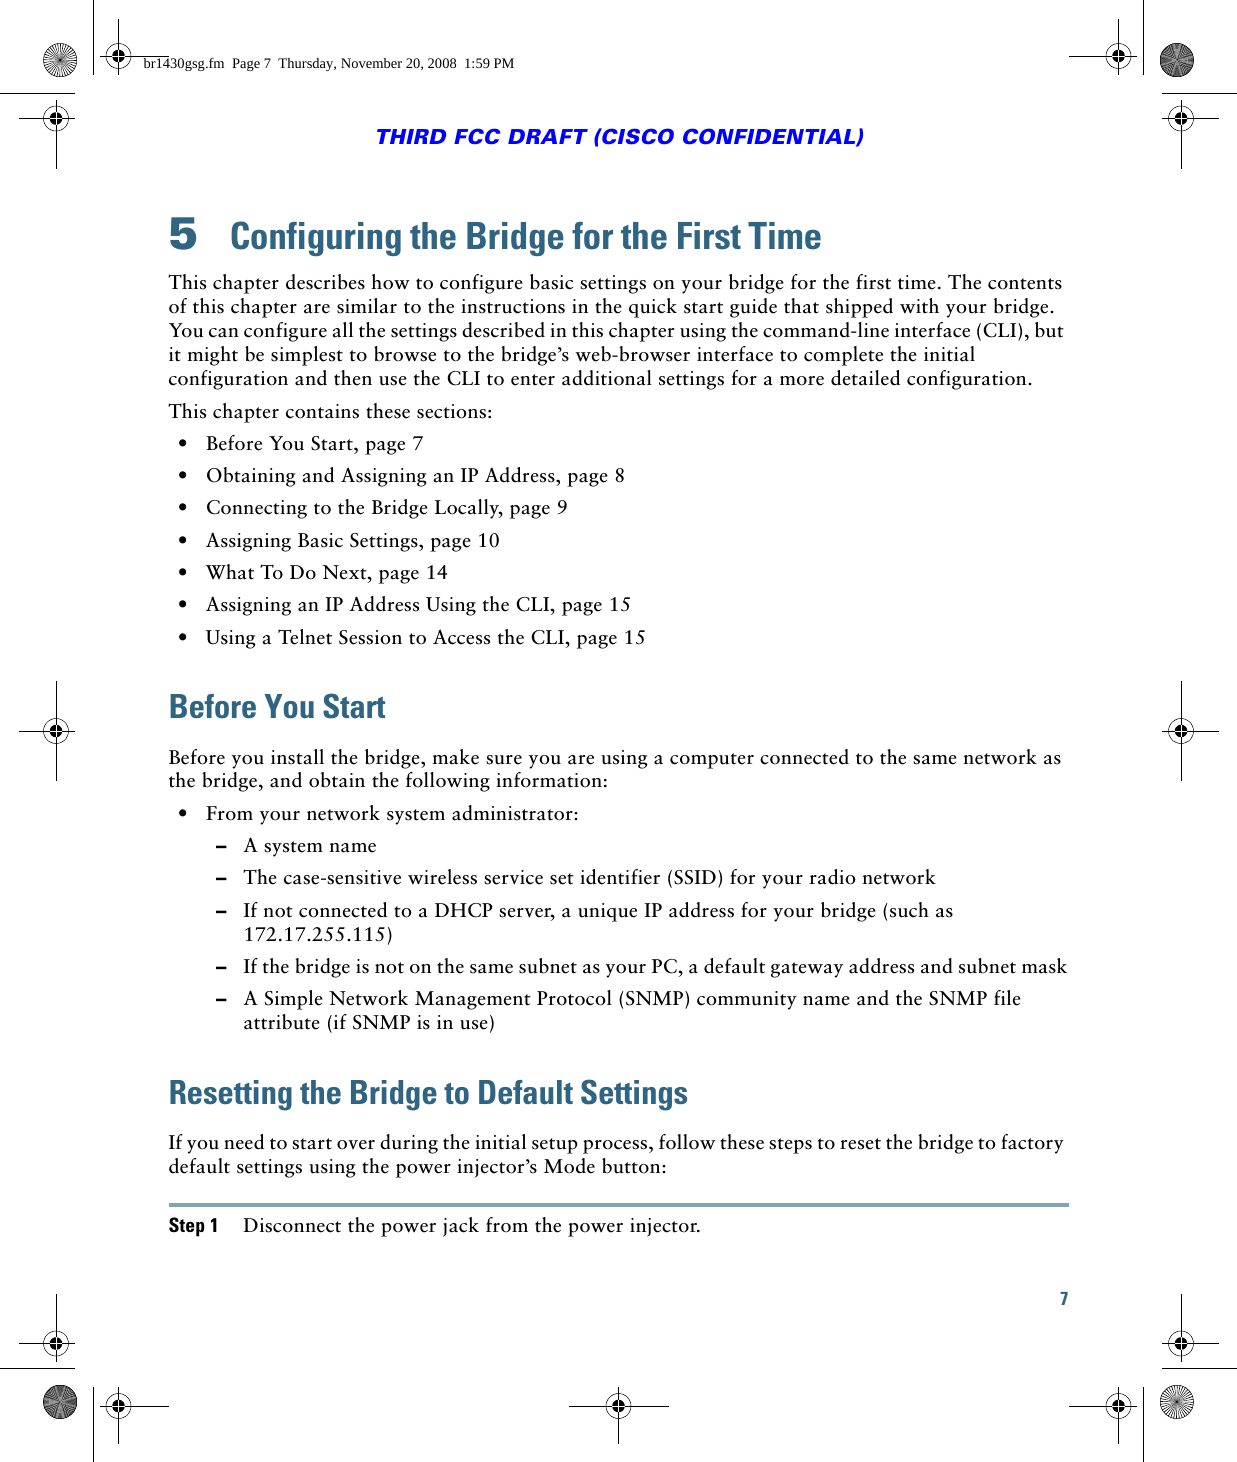 7THIRD FCC DRAFT (CISCO CONFIDENTIAL)5  Configuring the Bridge for the First TimeThis chapter describes how to configure basic settings on your bridge for the first time. The contents of this chapter are similar to the instructions in the quick start guide that shipped with your bridge. You can configure all the settings described in this chapter using the command-line interface (CLI), but it might be simplest to browse to the bridge’s web-browser interface to complete the initial configuration and then use the CLI to enter additional settings for a more detailed configuration. This chapter contains these sections:  • Before You Start, page 7  • Obtaining and Assigning an IP Address, page 8  • Connecting to the Bridge Locally, page 9  • Assigning Basic Settings, page 10  • What To Do Next, page 14  • Assigning an IP Address Using the CLI, page 15  • Using a Telnet Session to Access the CLI, page 15Before You StartBefore you install the bridge, make sure you are using a computer connected to the same network as the bridge, and obtain the following information:  • From your network system administrator:  –A system name  –The case-sensitive wireless service set identifier (SSID) for your radio network  –If not connected to a DHCP server, a unique IP address for your bridge (such as 172.17.255.115)  –If the bridge is not on the same subnet as your PC, a default gateway address and subnet mask  –A Simple Network Management Protocol (SNMP) community name and the SNMP file attribute (if SNMP is in use)Resetting the Bridge to Default SettingsIf you need to start over during the initial setup process, follow these steps to reset the bridge to factory default settings using the power injector’s Mode button:Step 1 Disconnect the power jack from the power injector.br1430gsg.fm  Page 7  Thursday, November 20, 2008  1:59 PM